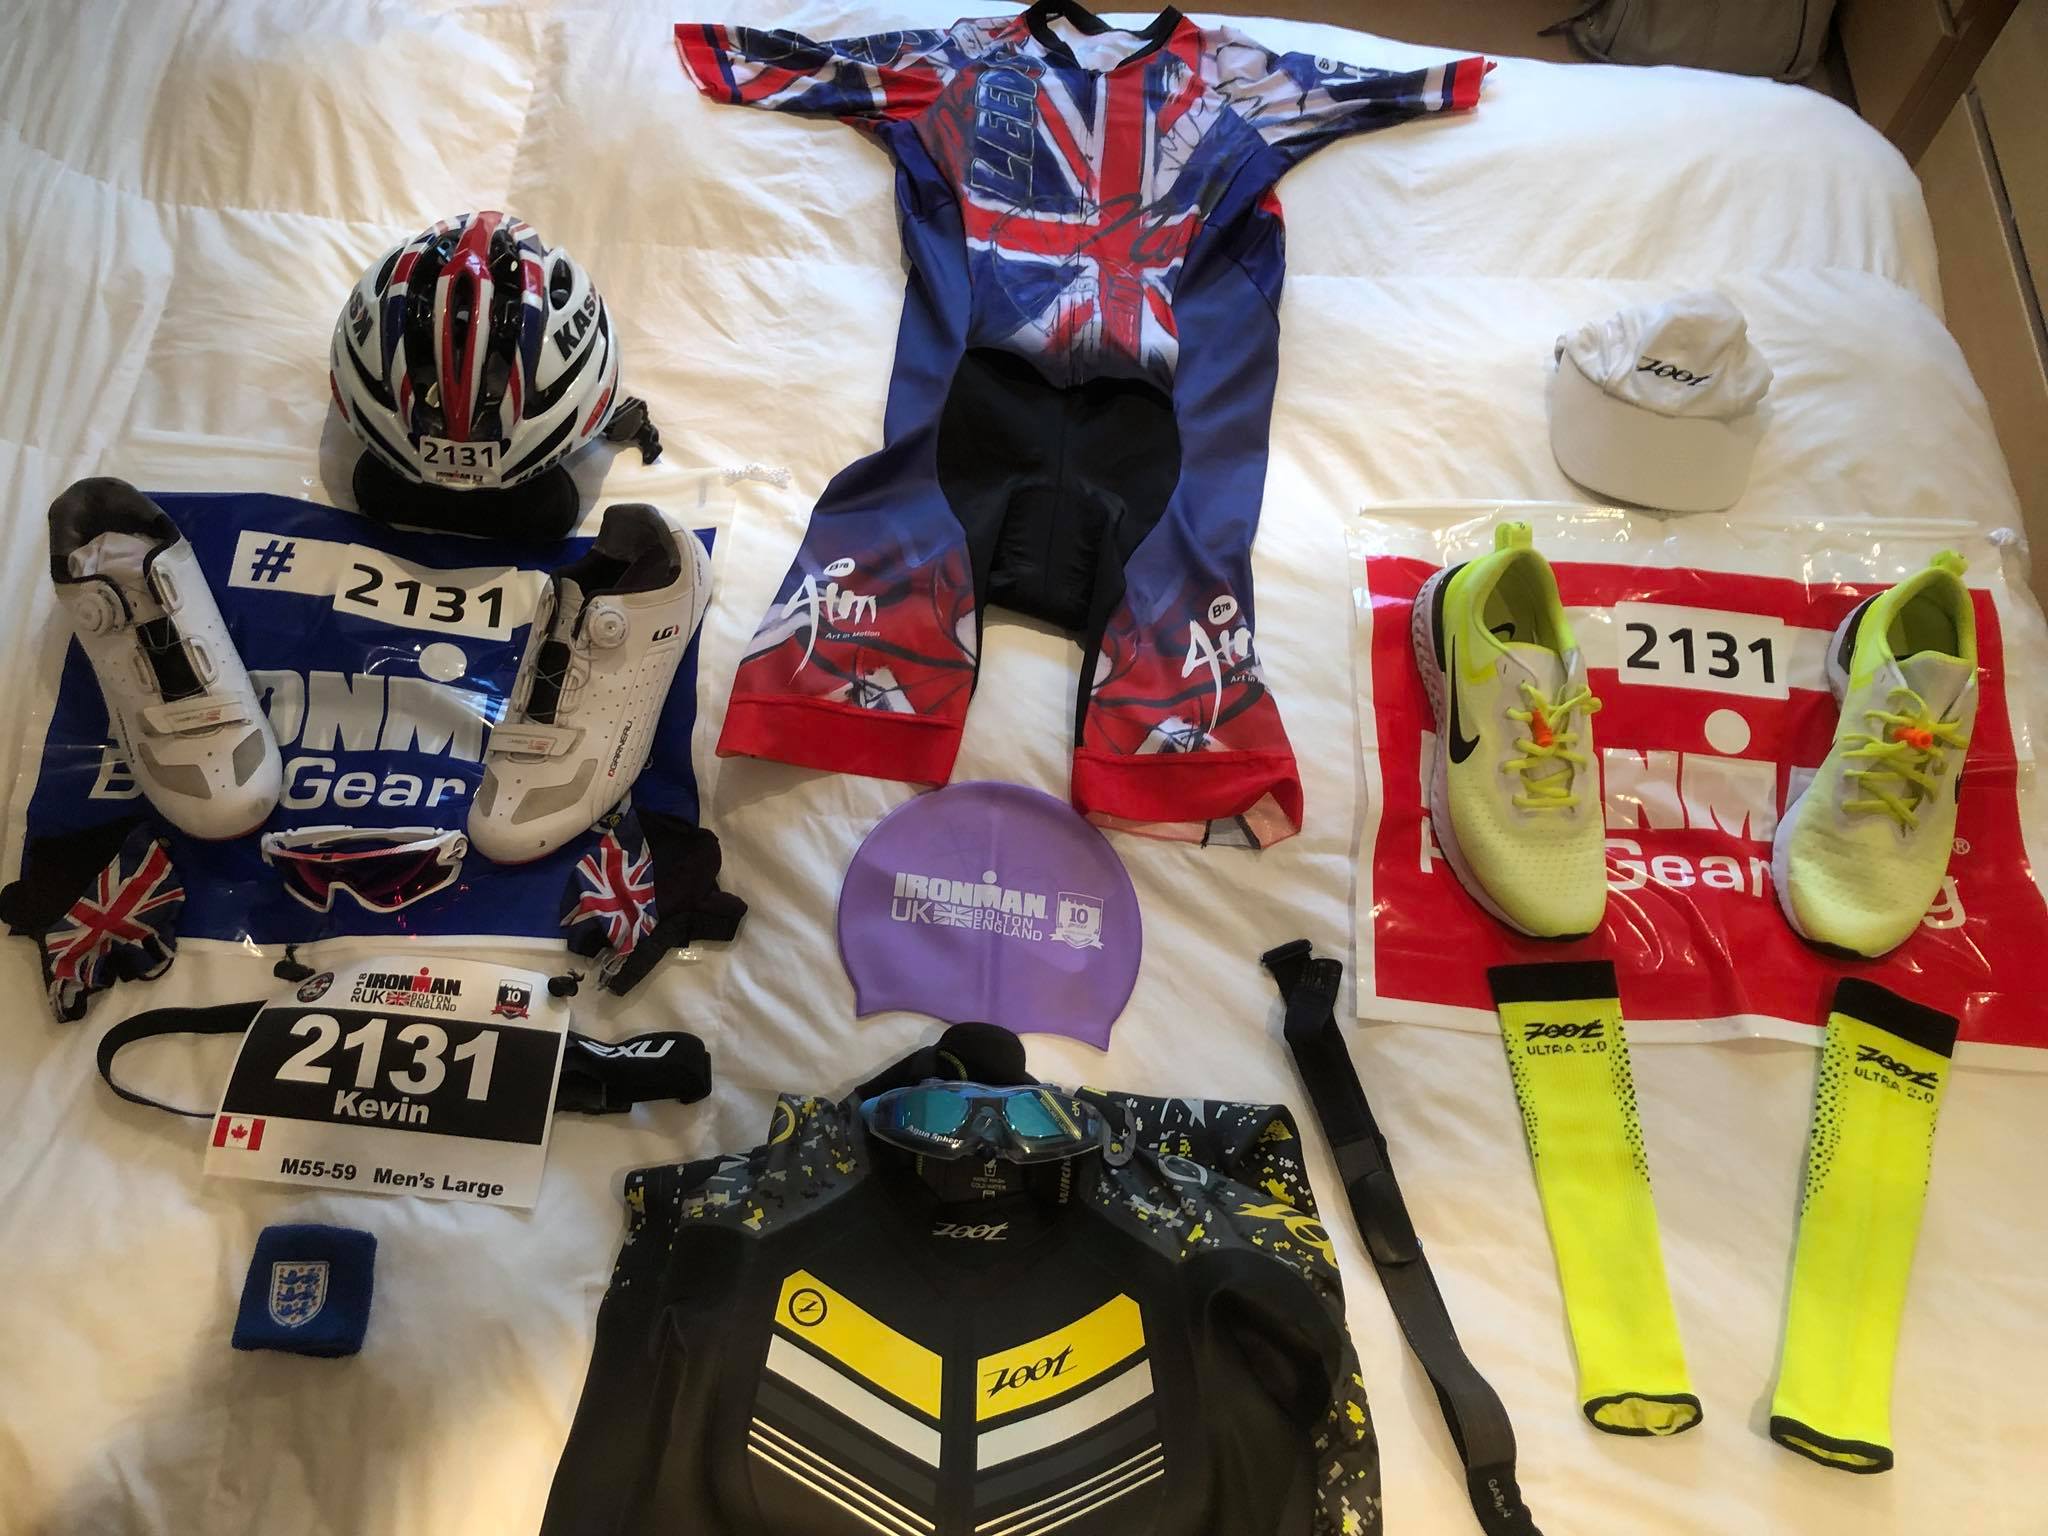 Coach_Terry_Wilson_Pursuit_of_The_Perfect_Race_IRONMAN_Bolton_United_Kingdom_Kevin_Nuun_Gear.jpg